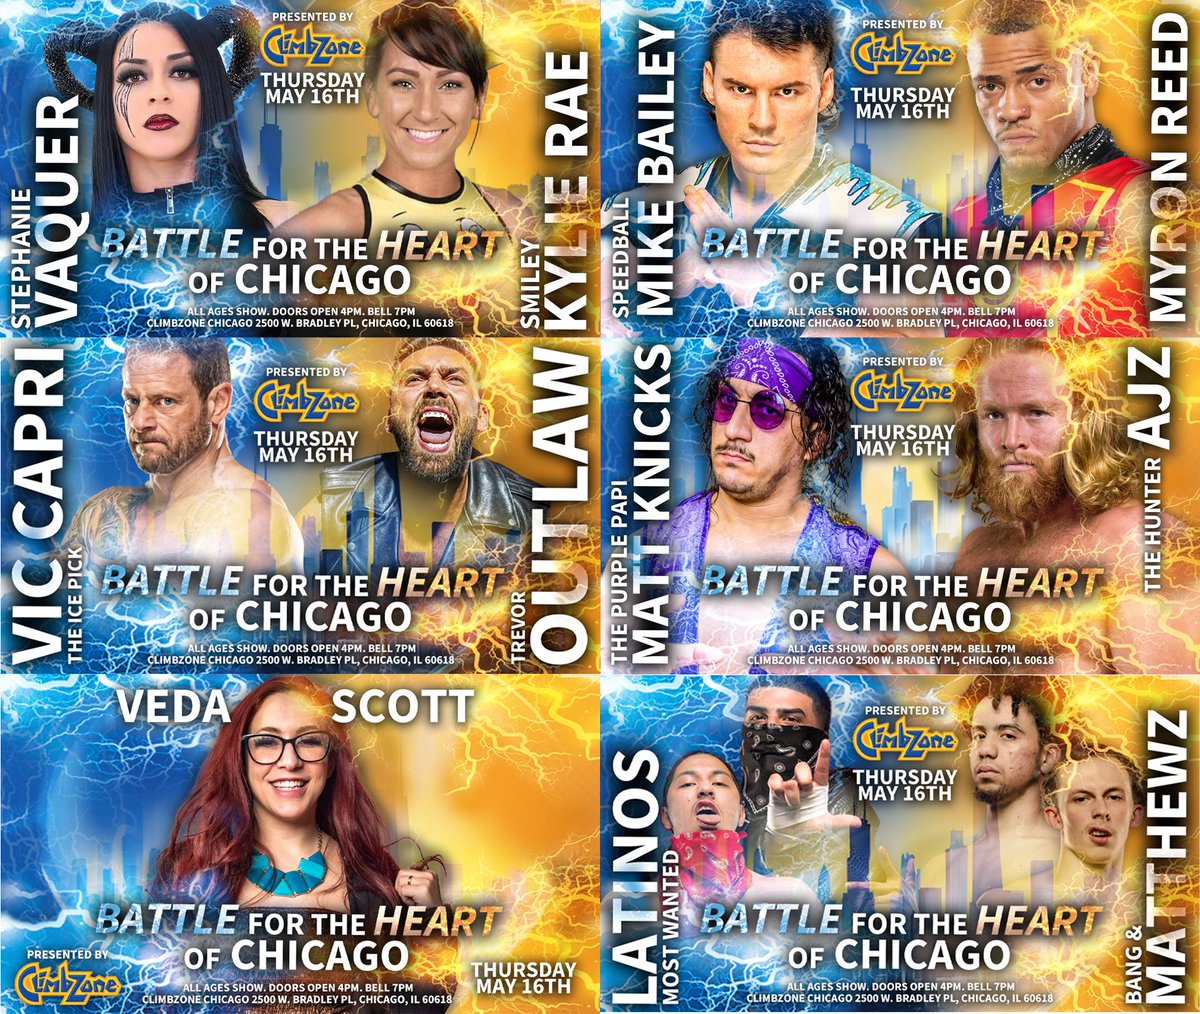 Wrestling Fans! This incredible card takes place in just under TWO WEEKS in Chicago! First-ever, all-timer women's match between the most beloved Chicago wrestler and the most impressive and fastest rising women's wrestler across multiple companies? ✔️ Super banger among…